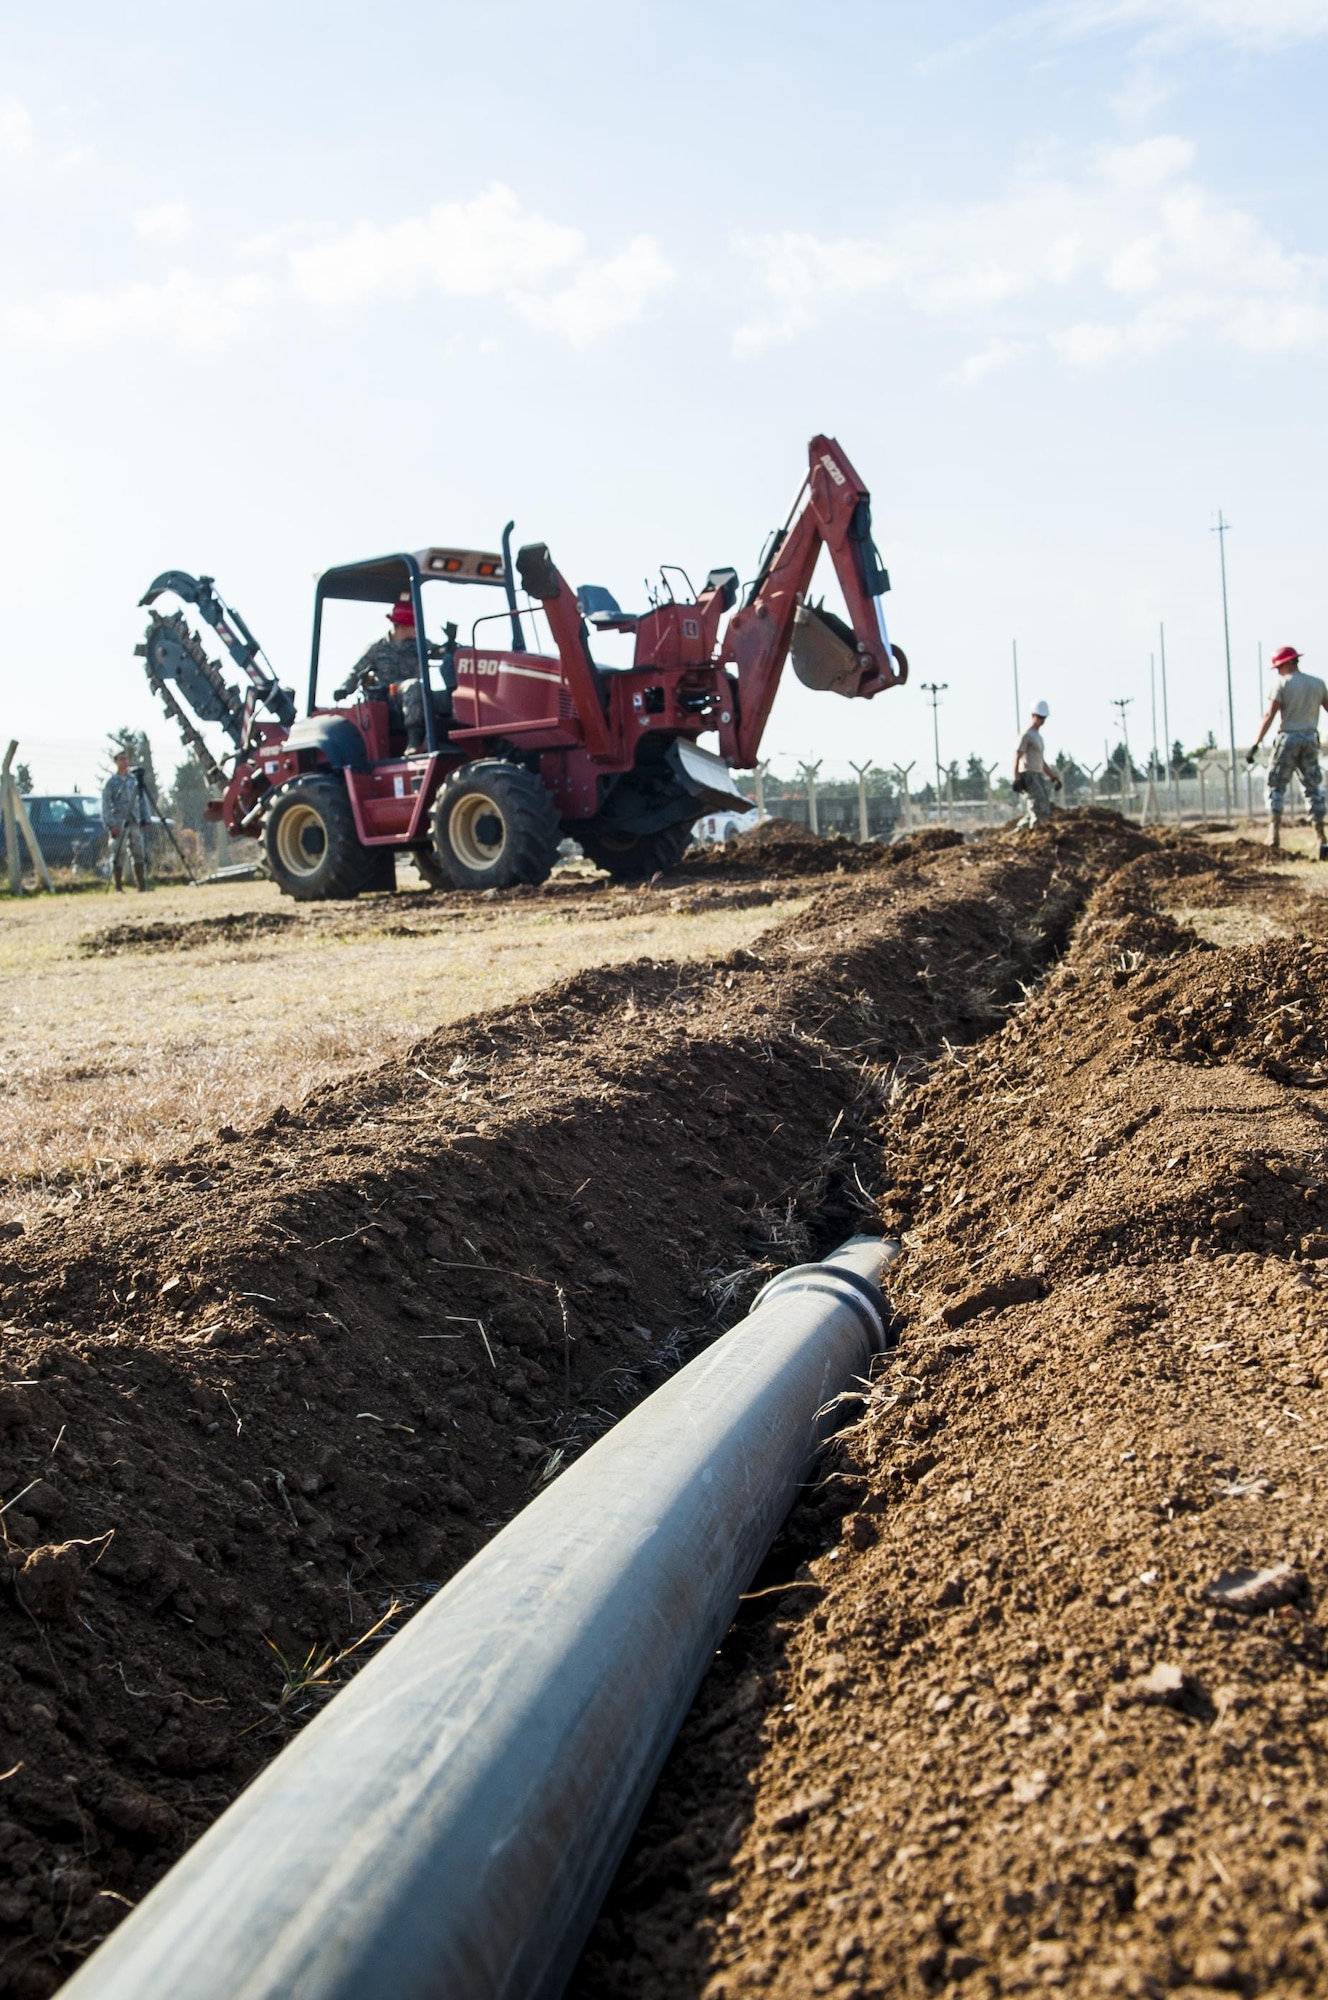 Airmen from the 39th Communications Squadron install underground communications lines, the framework for communication infrastructure Nov. 18, 2015, at Incirlik Air Base, Turkey. The underground communication cable is the first of many steps to establishing a communications infrastructure. The squadron works to establish and maintain new and old infrastructure to ensure Incirlik and Operation Inherent Resolve missions are accomplished. (U.S. Air Force photo/Staff Sgt. Jack Sanders)